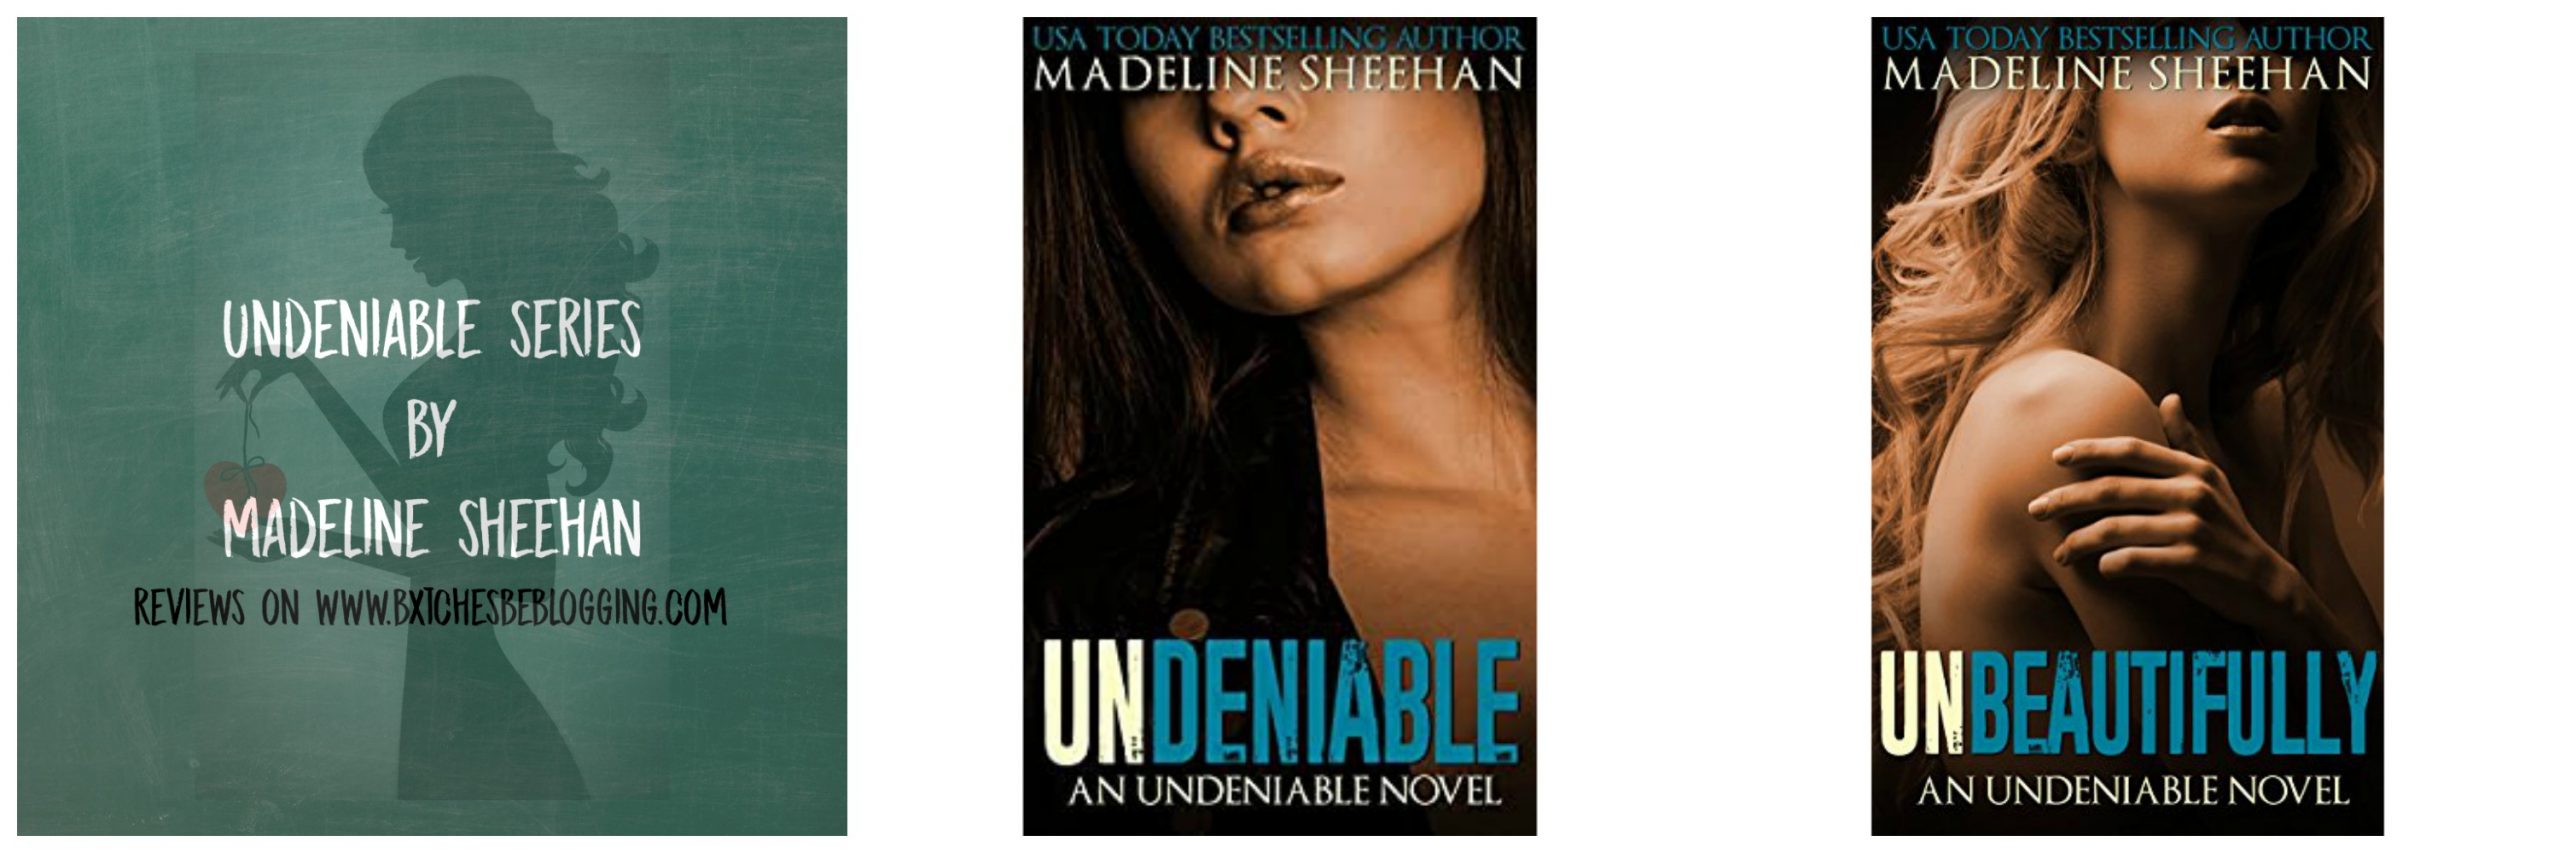 Undeniable Series by Madeline Sheehan | Reviews on www.bxtchesbeblogging.com